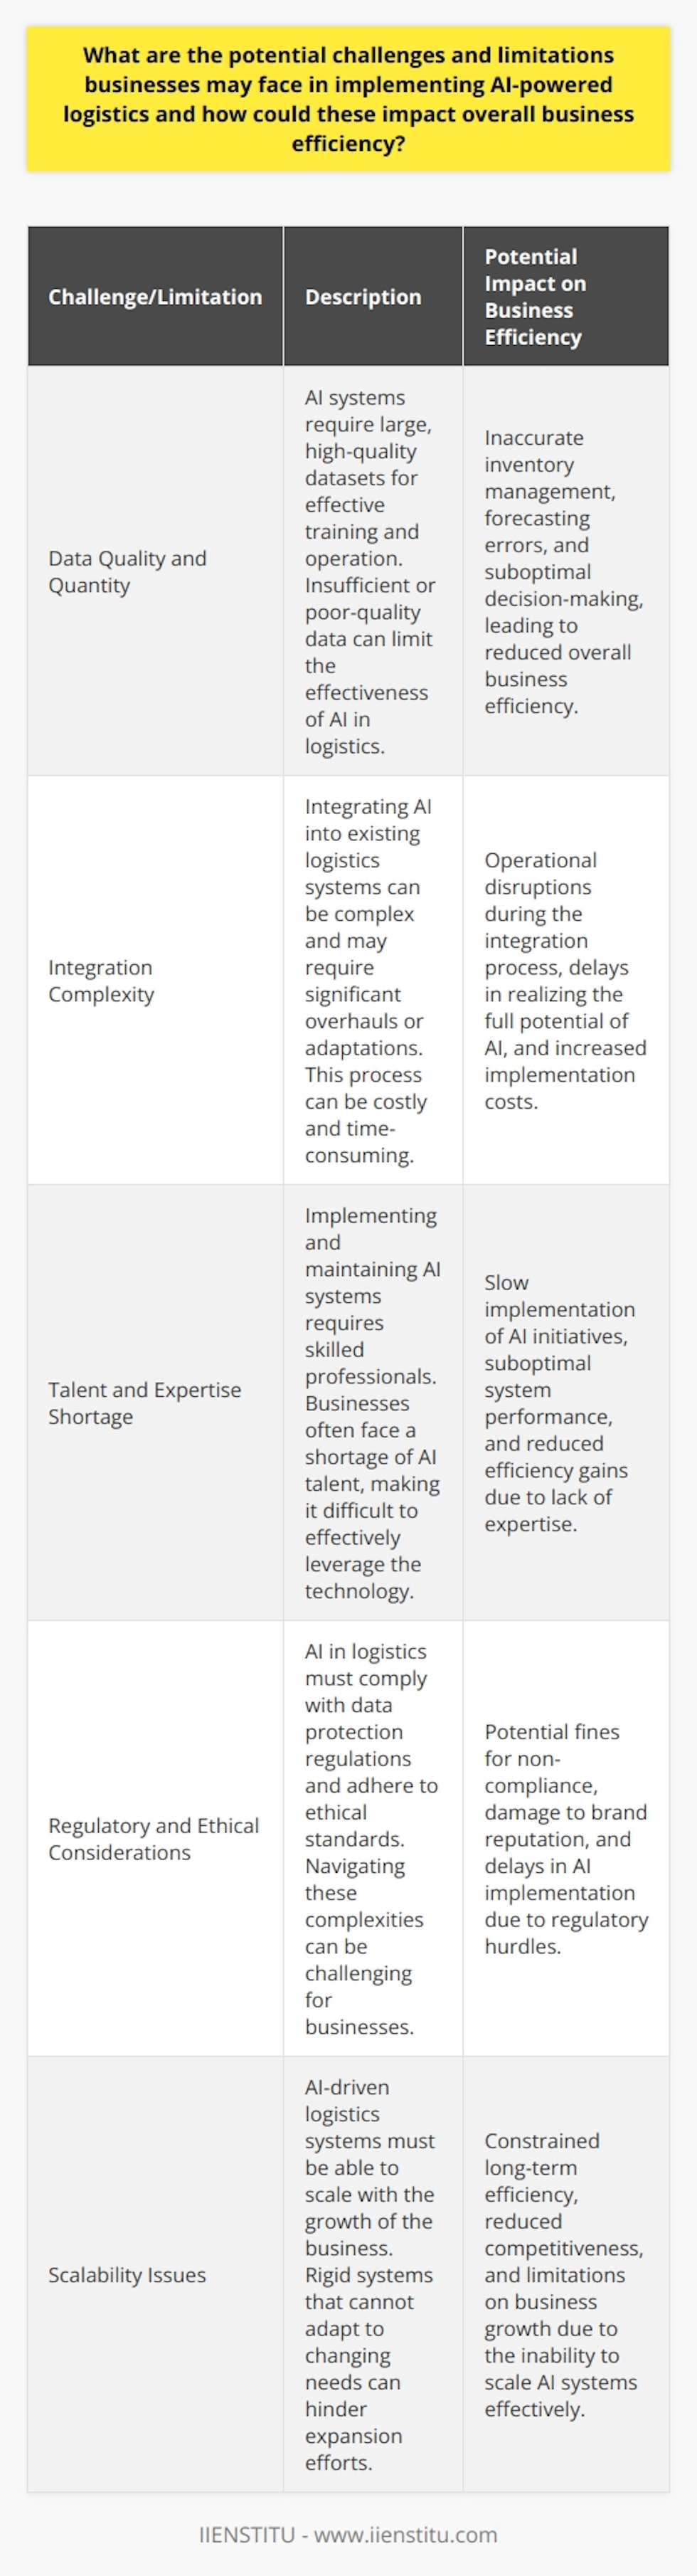 Introduction to AI in Logistics Artificial Intelligence (AI) has transformed logistics. Companies seek efficiency through AI. This integration, though beneficial, presents challenges. Data Quality and Quantity AI requires data.  Large, quality data sets train AI. Insufficient or poor-quality data limit AI effectiveness. In logistics, data issues can affect inventory management and forecasting accuracy, impacting overall business efficiency. Integration Complexity Integrating AI isnt simple. Existing systems may hinder seamless AI adoption. Companies must overhaul or adapt these systems. This process can prove costly and time-consuming. Failure to integrate effectively can lead to operational disruptions, undermining the potential efficiency gains of AI. Talent and Expertise AI demands skilled professionals. Businesses often face talent shortages in AI. Without expertise, companies struggle to implement and maintain AI systems. This gap can slow down AI initiatives, affecting the anticipated efficiency improvements. Regulatory and Ethical Considerations AI in logistics raises regulatory concerns. Compliance with data protection laws is mandatory. Ethical considerations must take center stage, too. Businesses need to navigate these complexities. Non-compliance risks fines and damages brand reputation. Reliability and Continuity AI systems are not infallible. They require continuous maintenance. Unexpected downtime or malfunctions can disrupt logistics operations. Reliable back-up systems and contingency plans are essential. Lacking these, a business could face significant efficiency losses. Scalability Issues Scalability is crucial for growth. AI-driven logistics must scale with business needs. Rigid systems that cannot scale impede expansion efforts. This limitation can constrain a businesss long-term efficiency and competitiveness. Resistance to Change Change often meets resistance. Employees may resist AI initiatives. This resistance can slow adoption. Buy-in from all levels is essential for smooth transition and realization of AIs efficiency benefits. AI in logistics offers vast potential. Yet, businesses face real challenges in implementation. Addressing these issues head-on is paramount. Only then can businesses fully harness AIs power for enhanced efficiency.